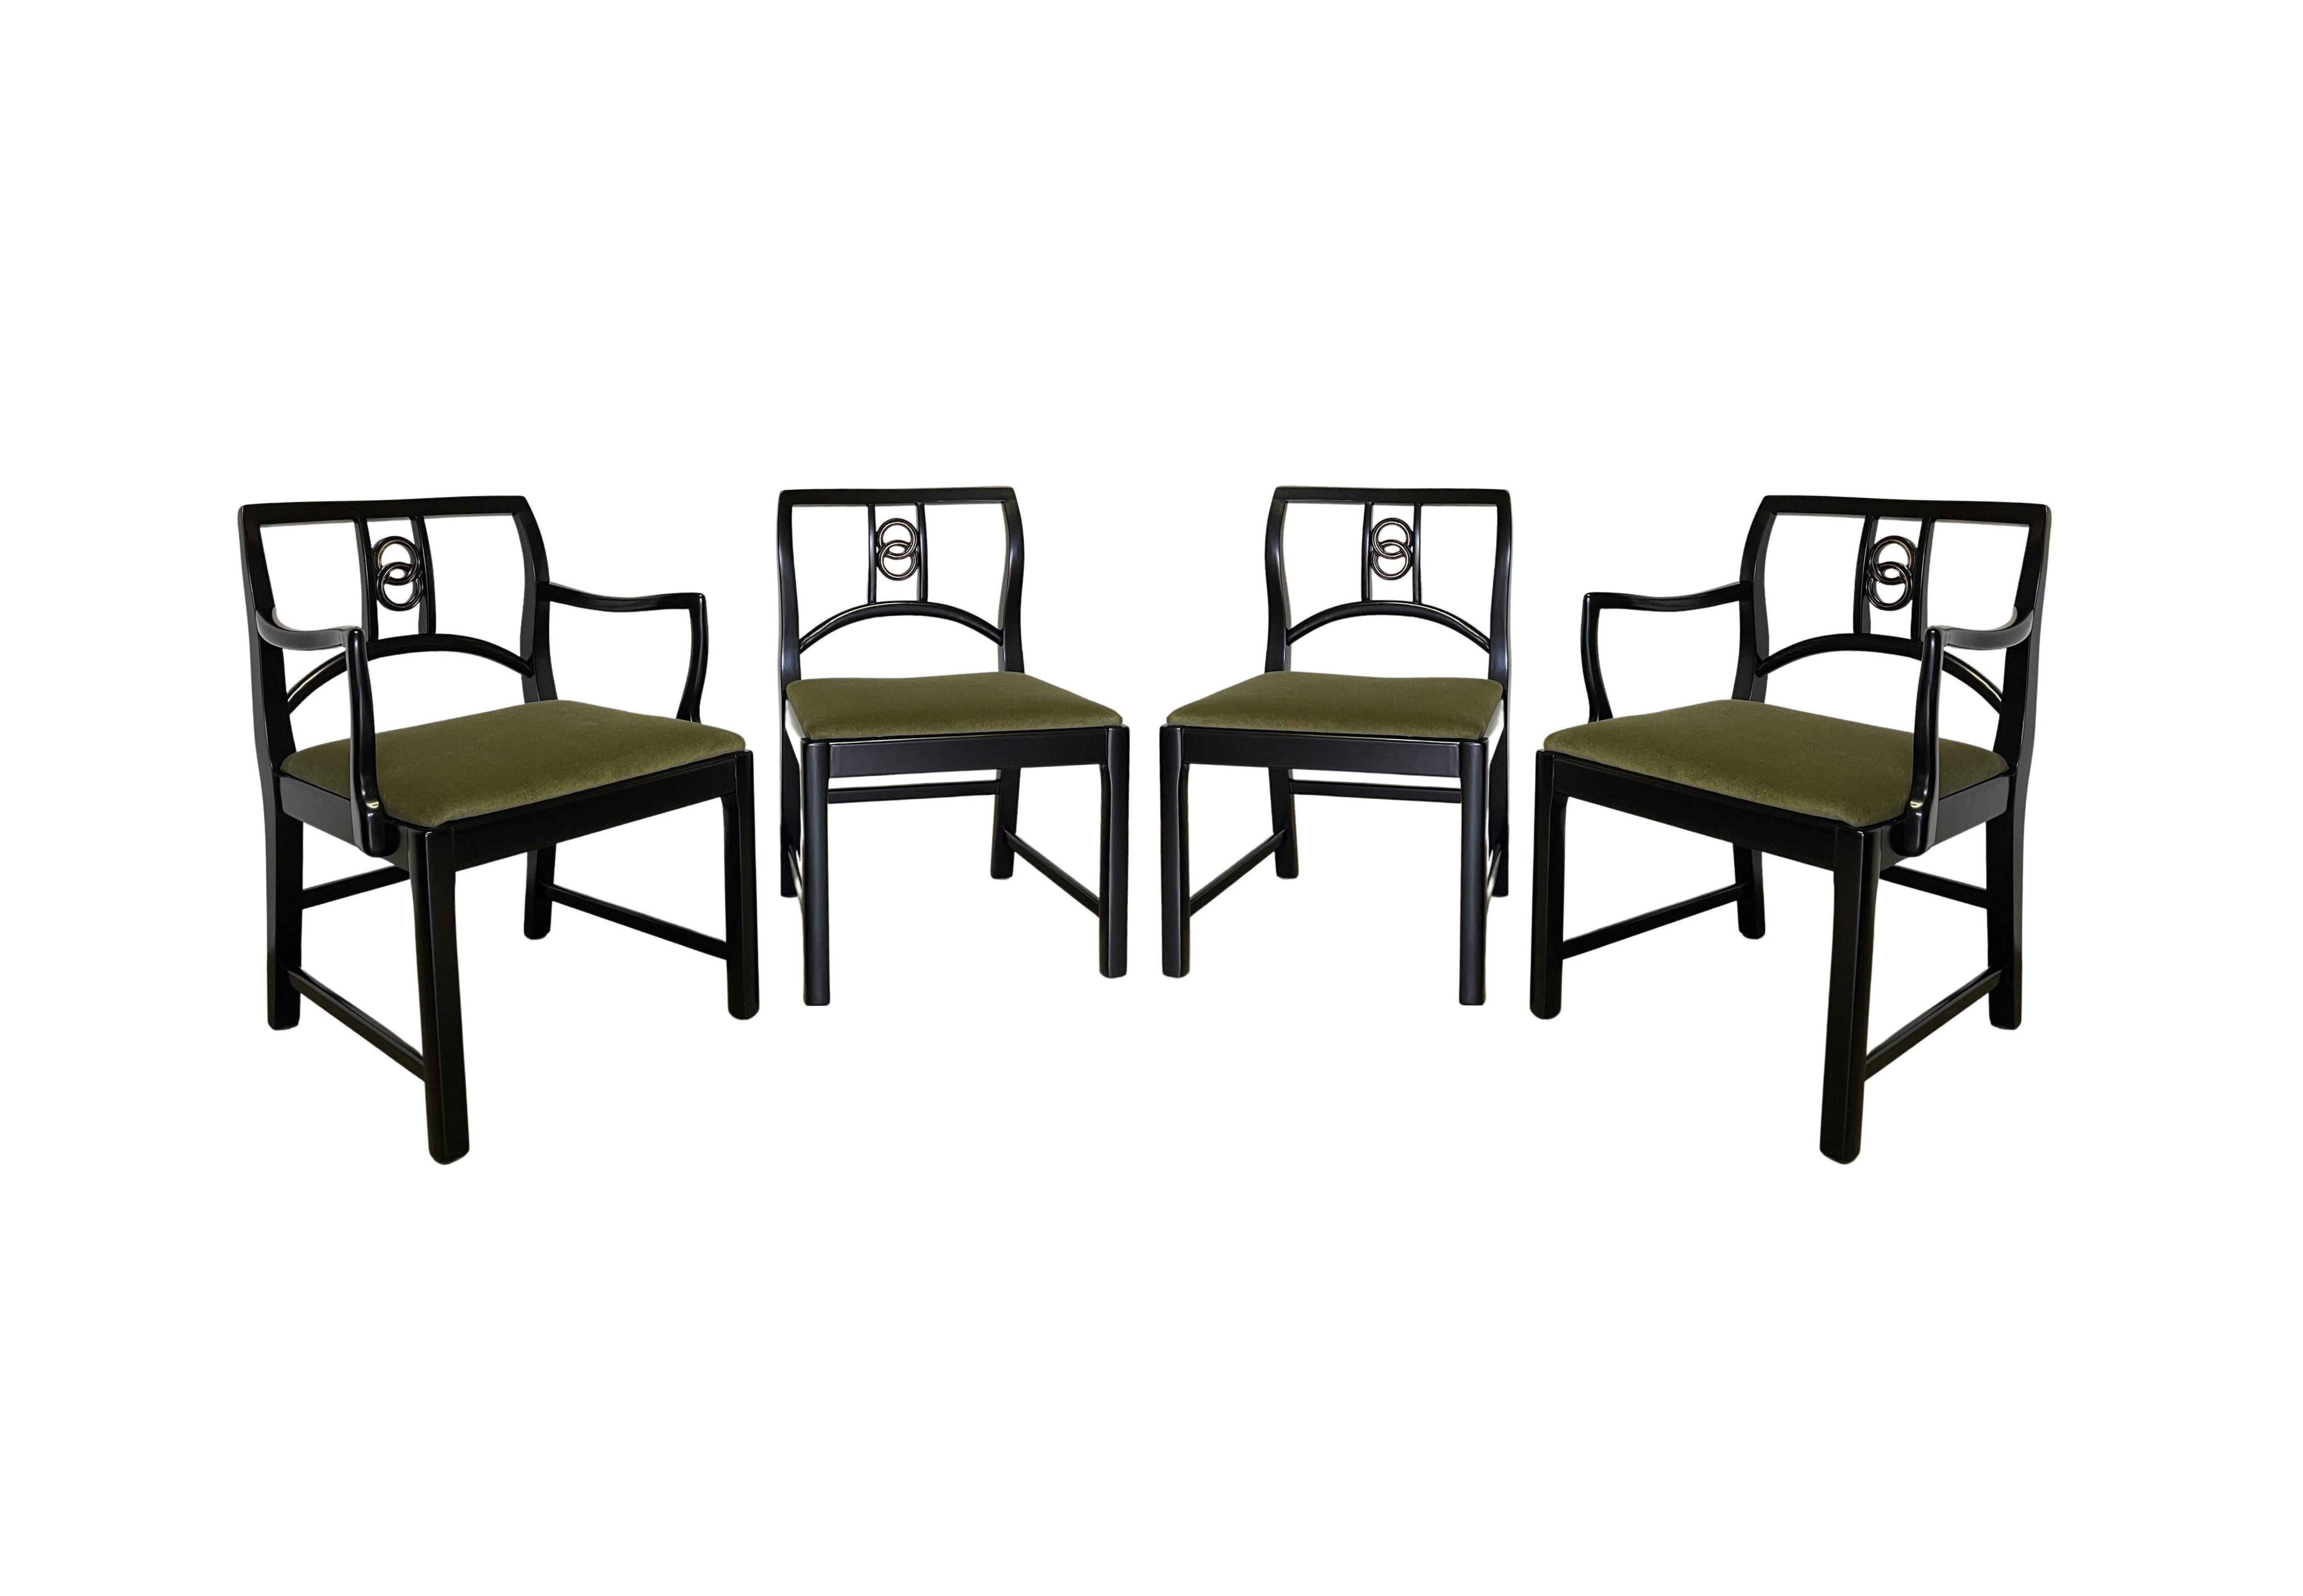 Sophisticated and elegant set of mid-century modern sculptural dining chairs designed by the American design legend Michael Taylor for Baker Furniture, circa 1960s. The set includes two (2) host and four (4) side chairs. This particular series is